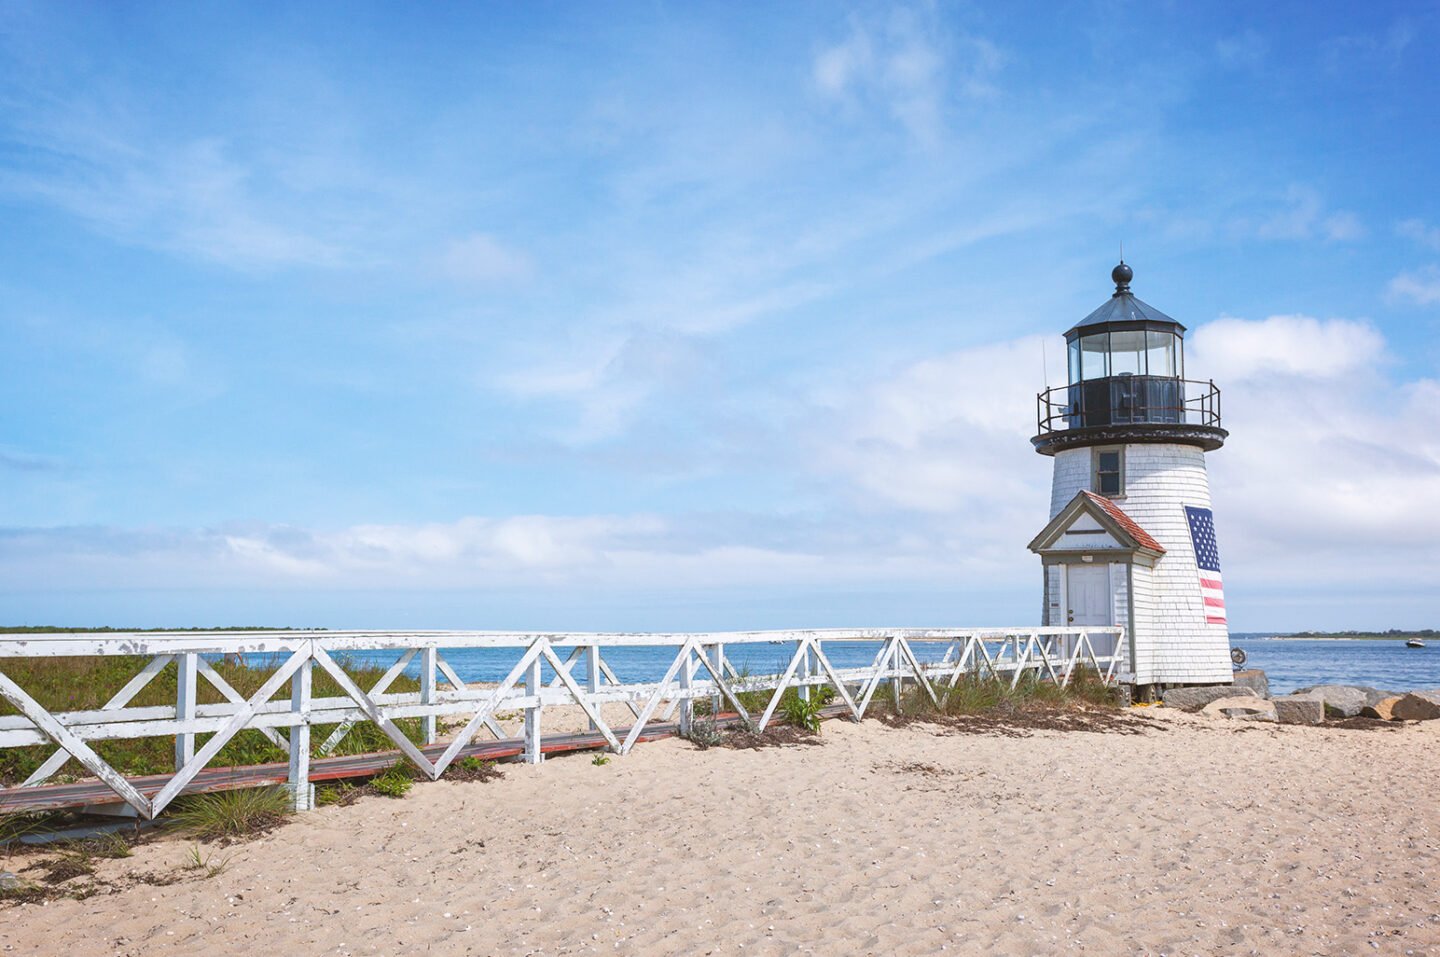 Tips on Having a Great Time Visiting Nantucket with Kids